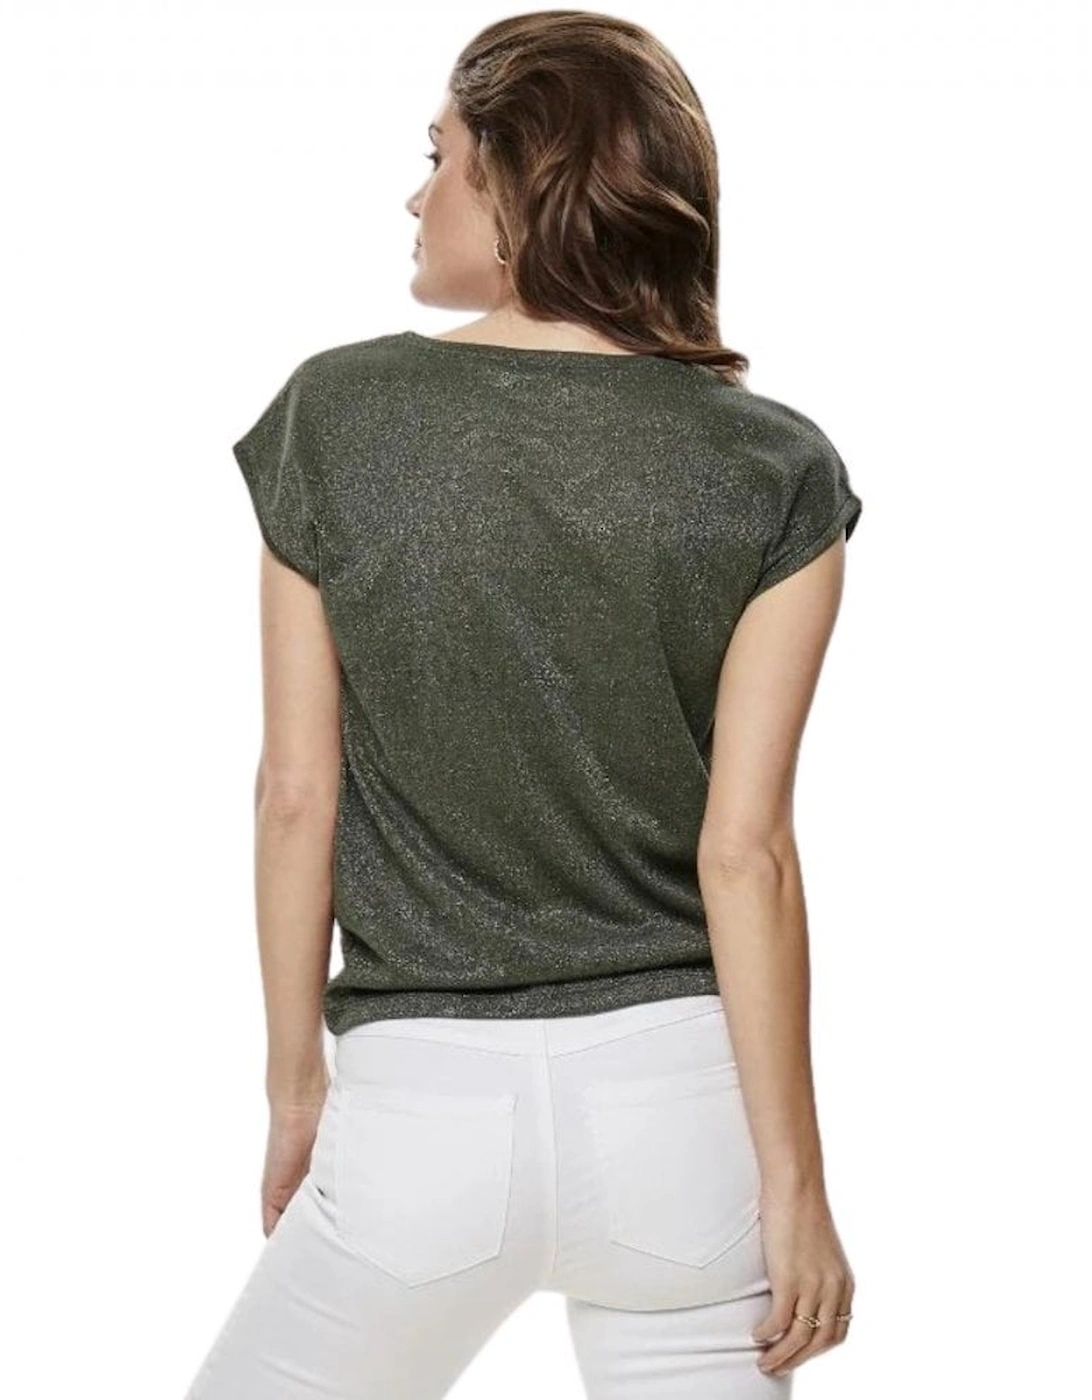 Silvery Loose Short Sleeved Top - Green